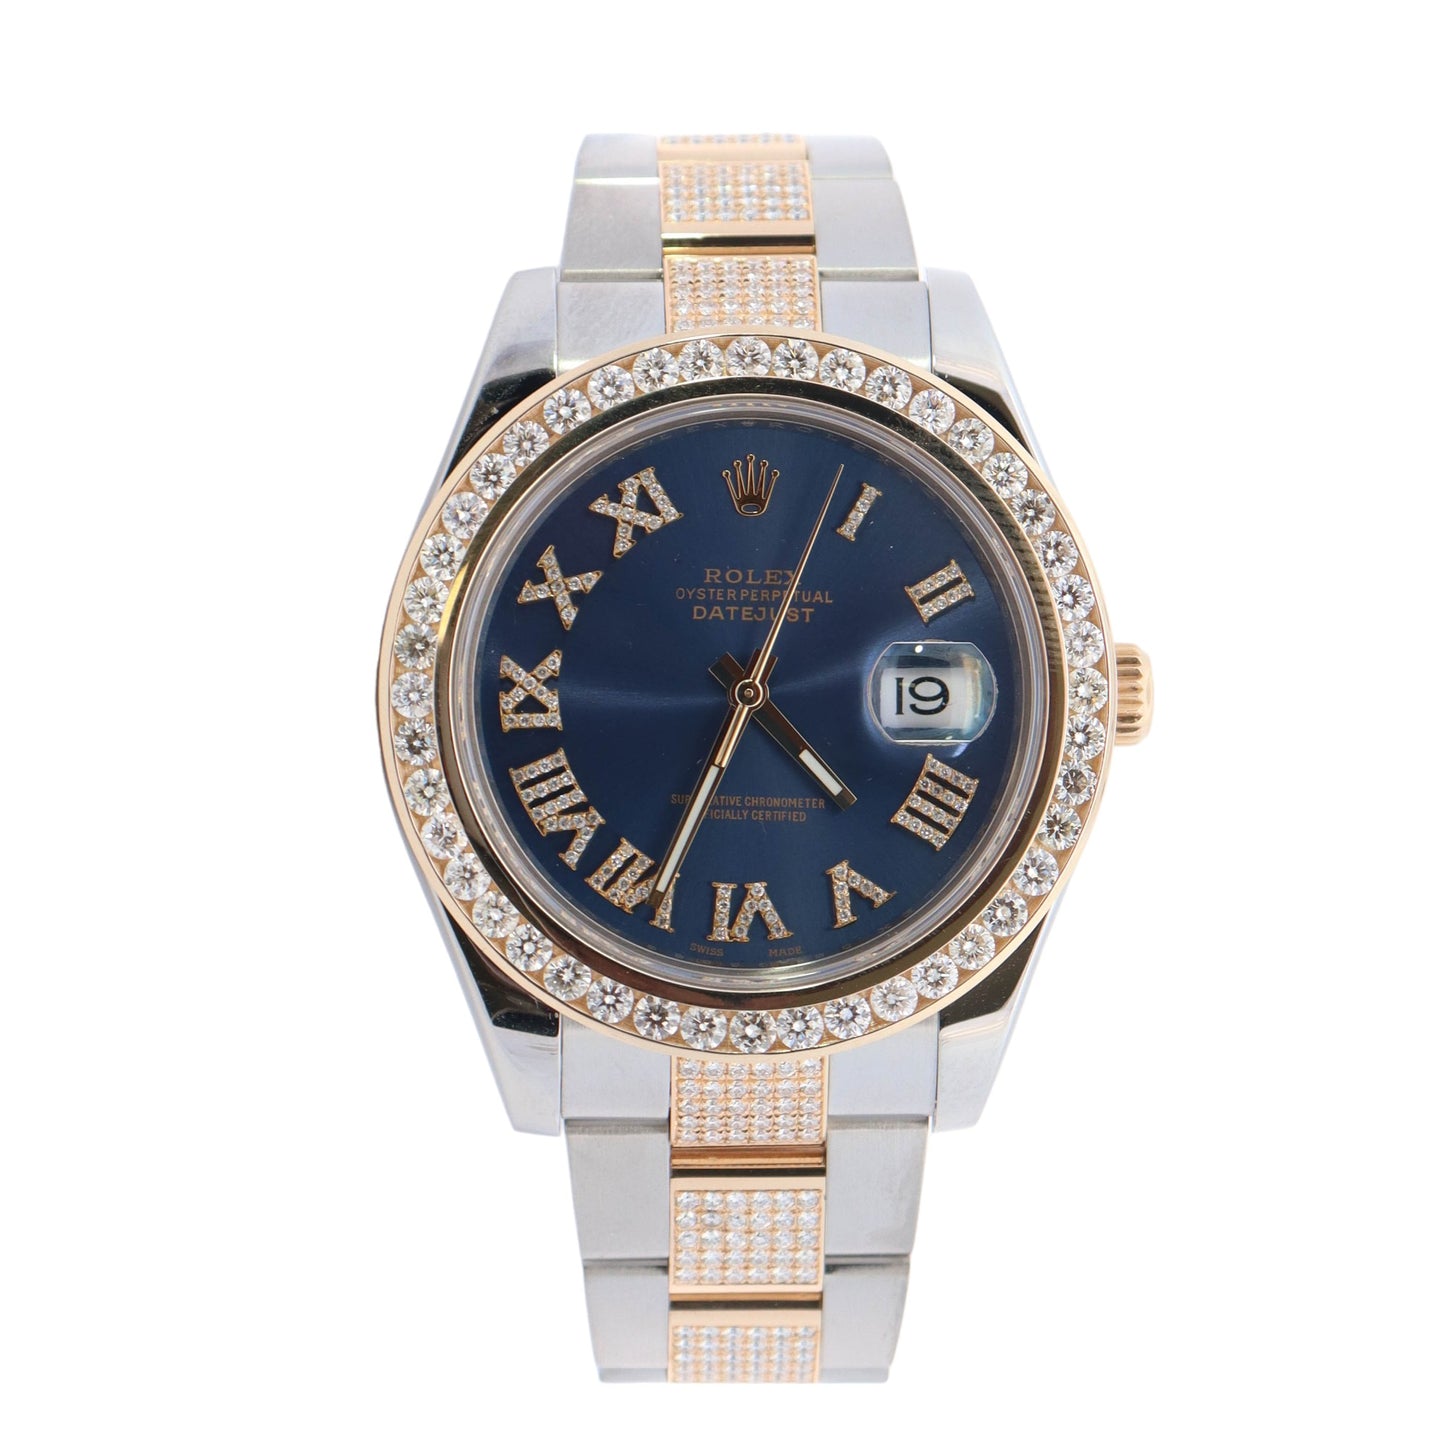 Rolex Datejust Two Tone Yellow Gold & Steel 41mm Blue Diamond Roman Dial Watch Reference #: 116333